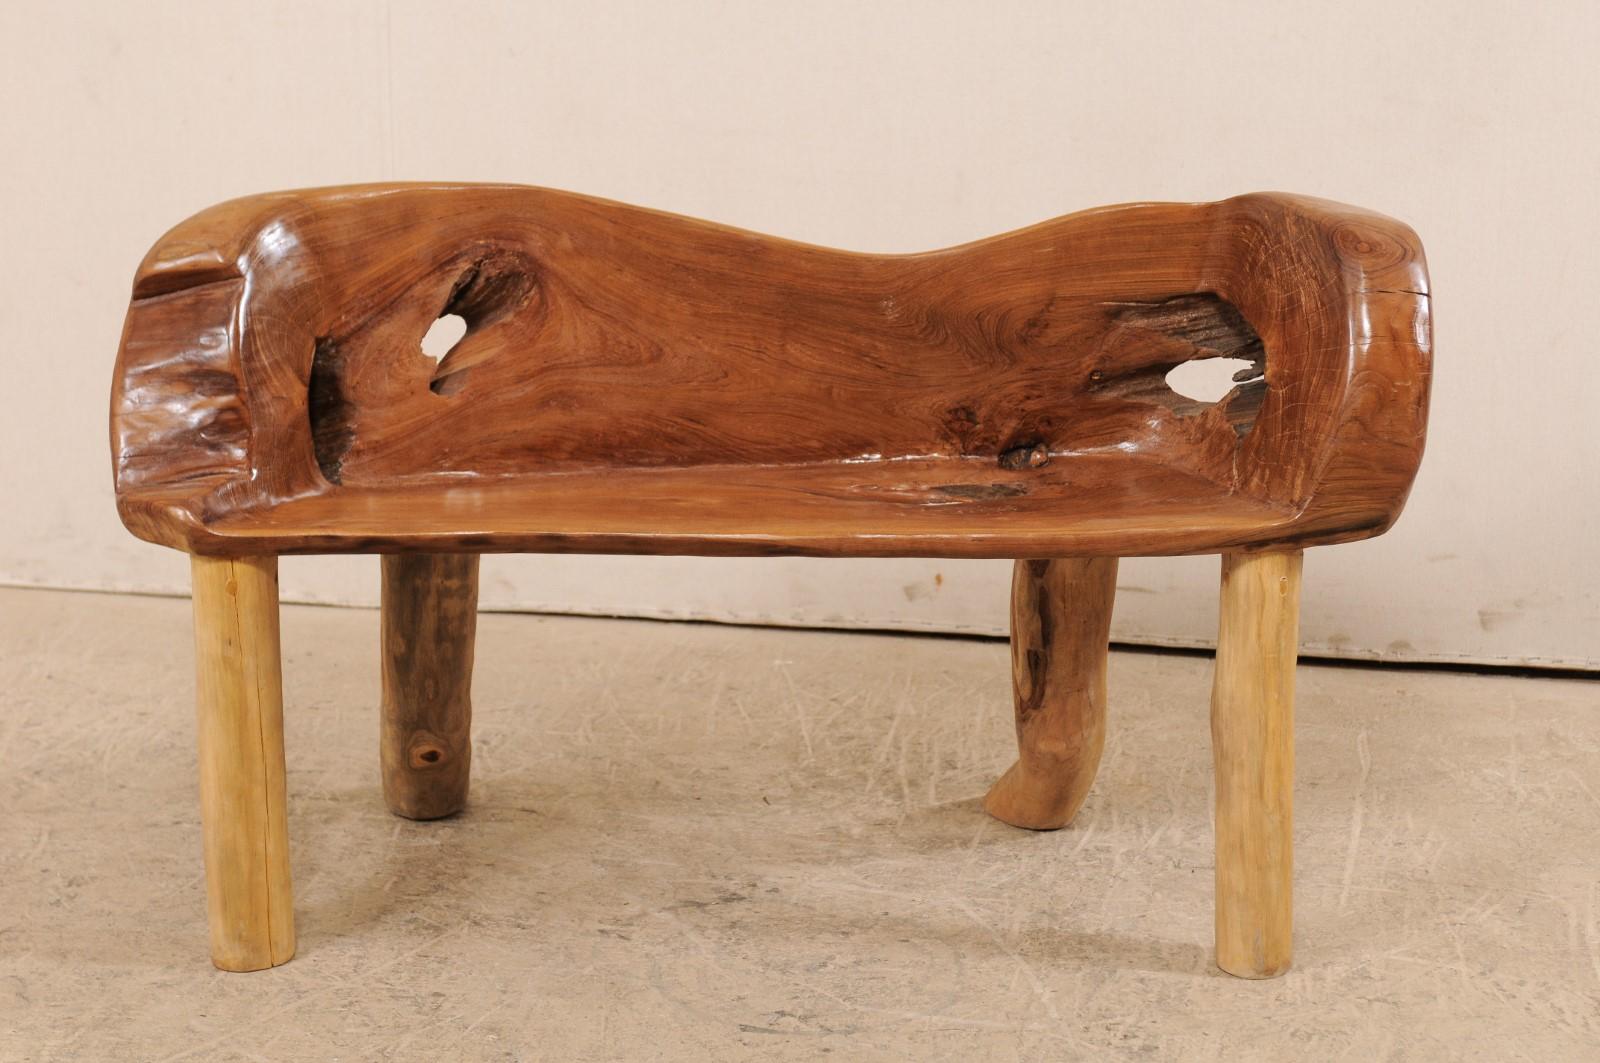 Rustic Petite Sized Natural Teak Wood Bench with Live Edge